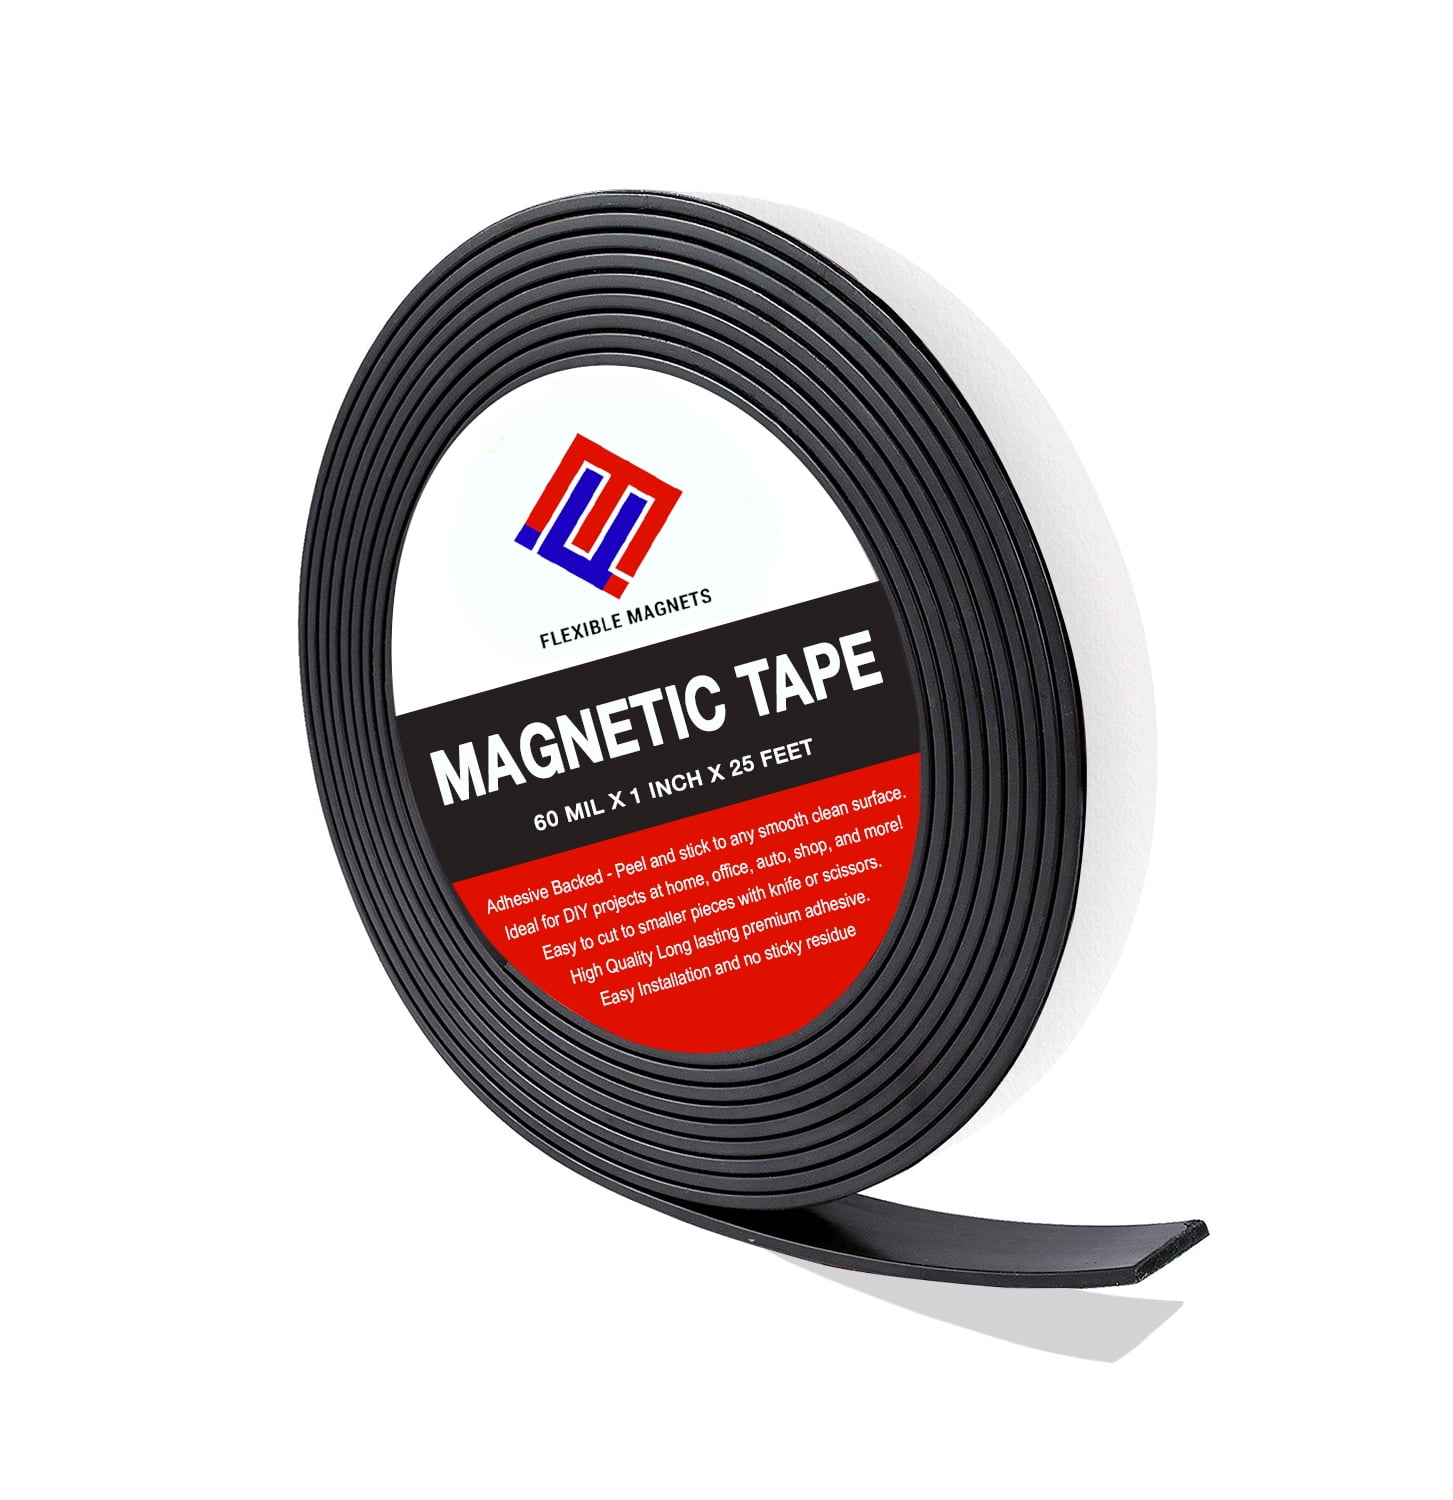 Self-Adhesive Magnetic Flexible Tape by The Magnet Shop® 